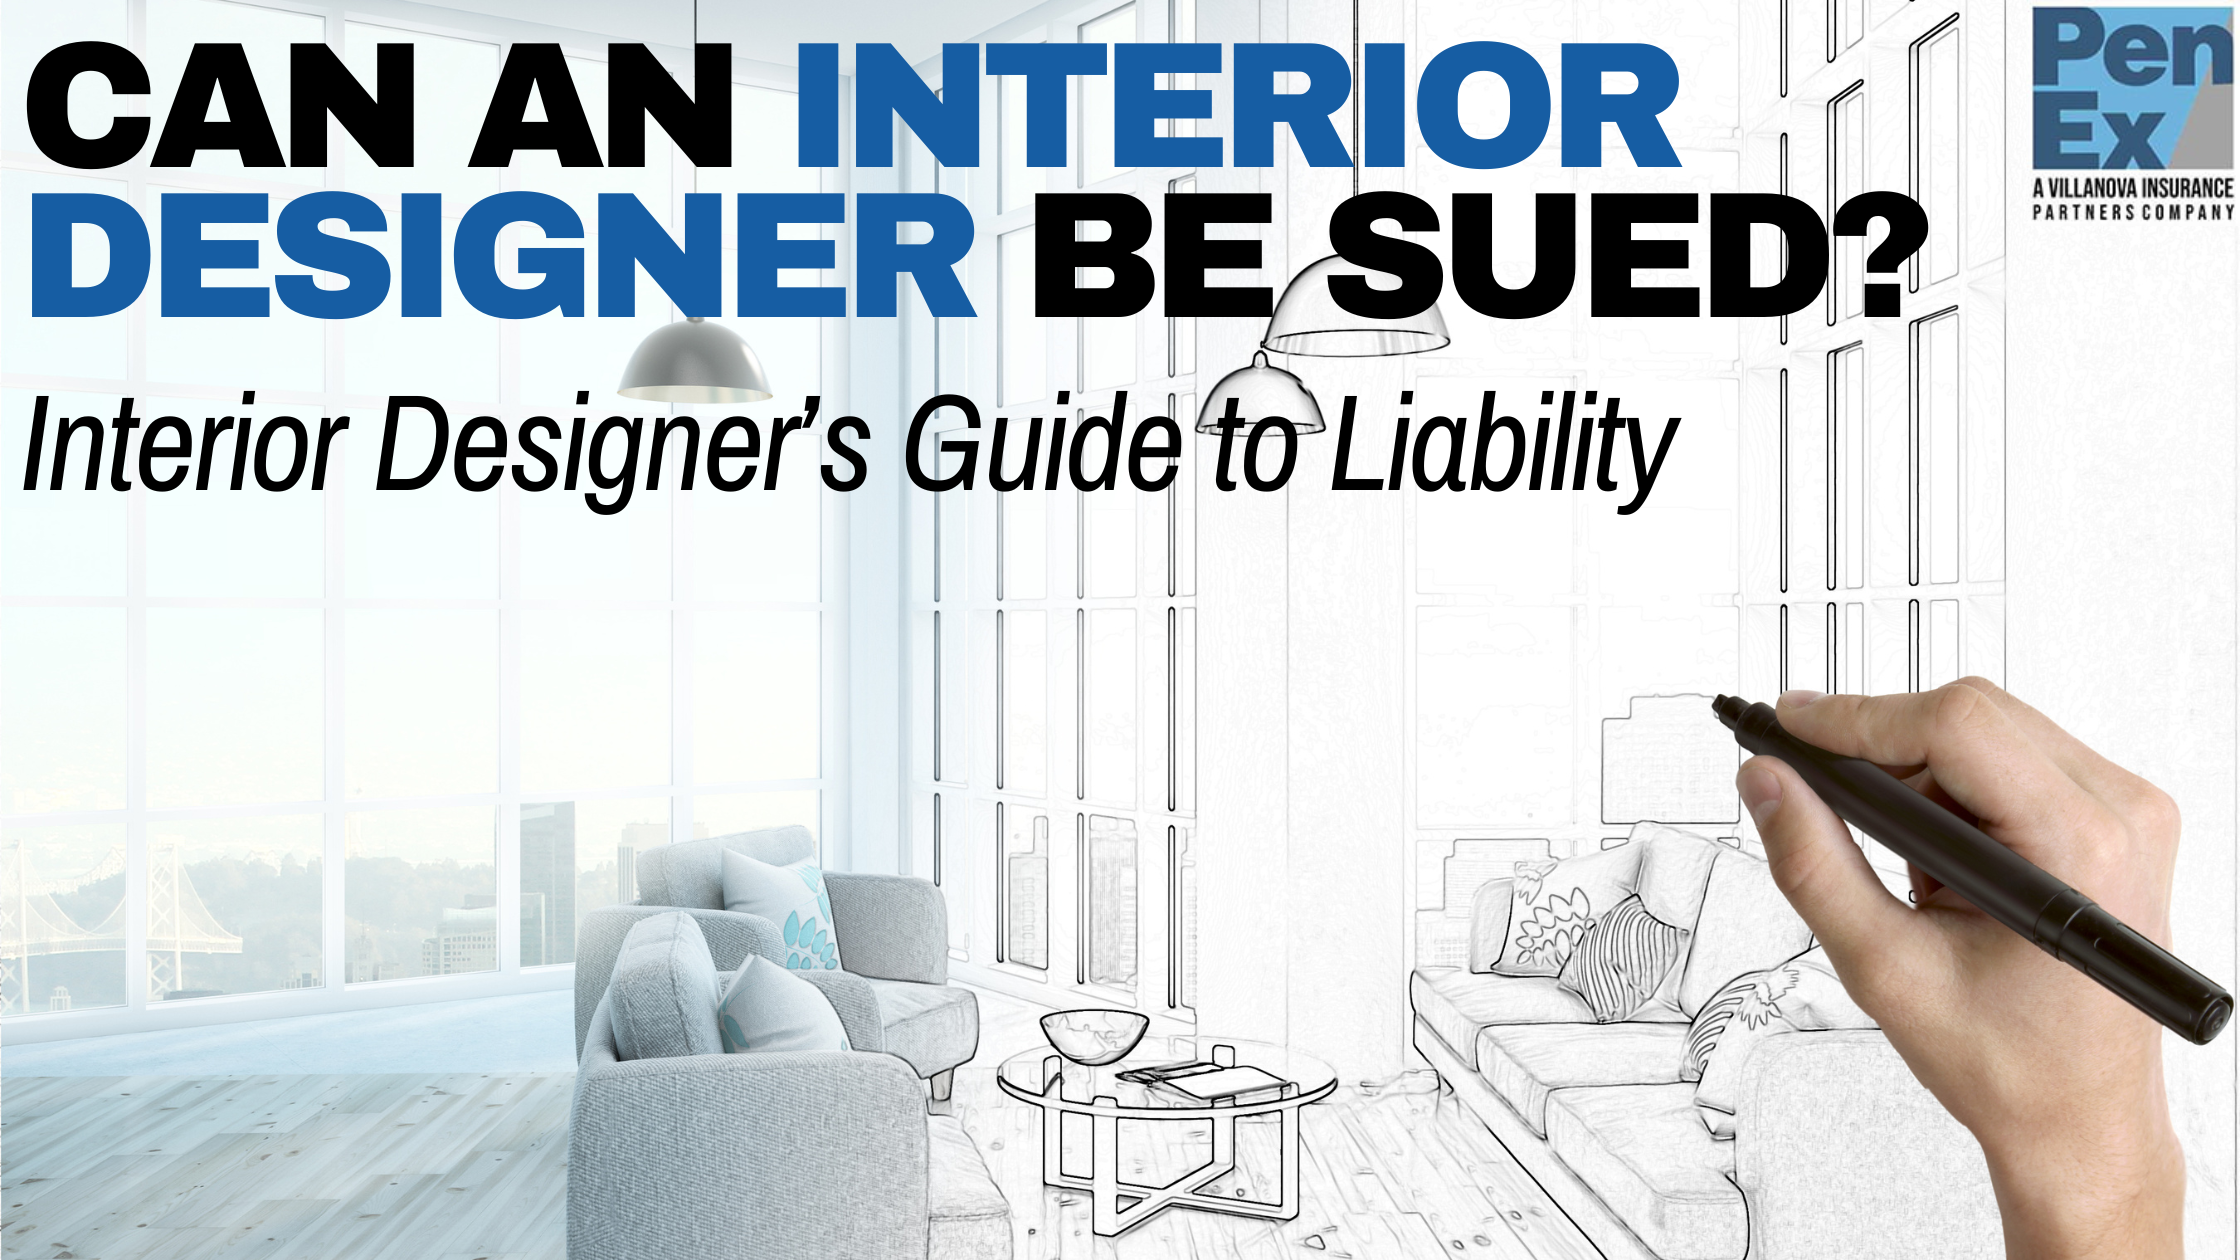 Can an Interior Designer Be Sued?